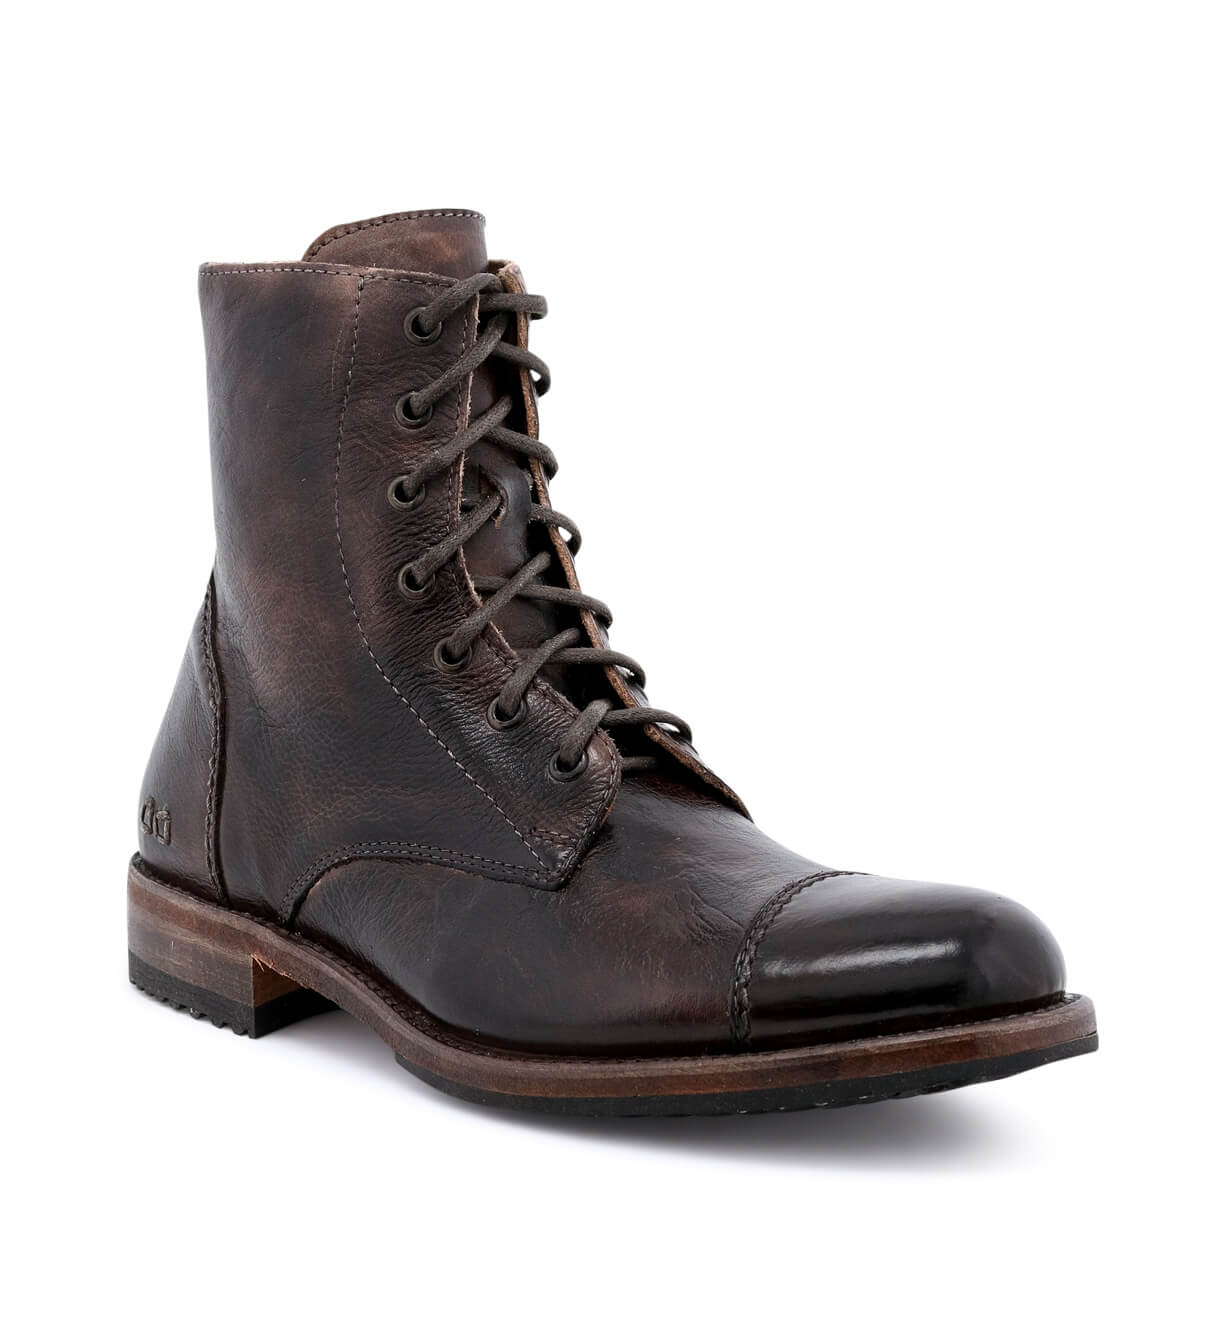 A men's brown leather boot with laces, the Protege by Bed Stu.